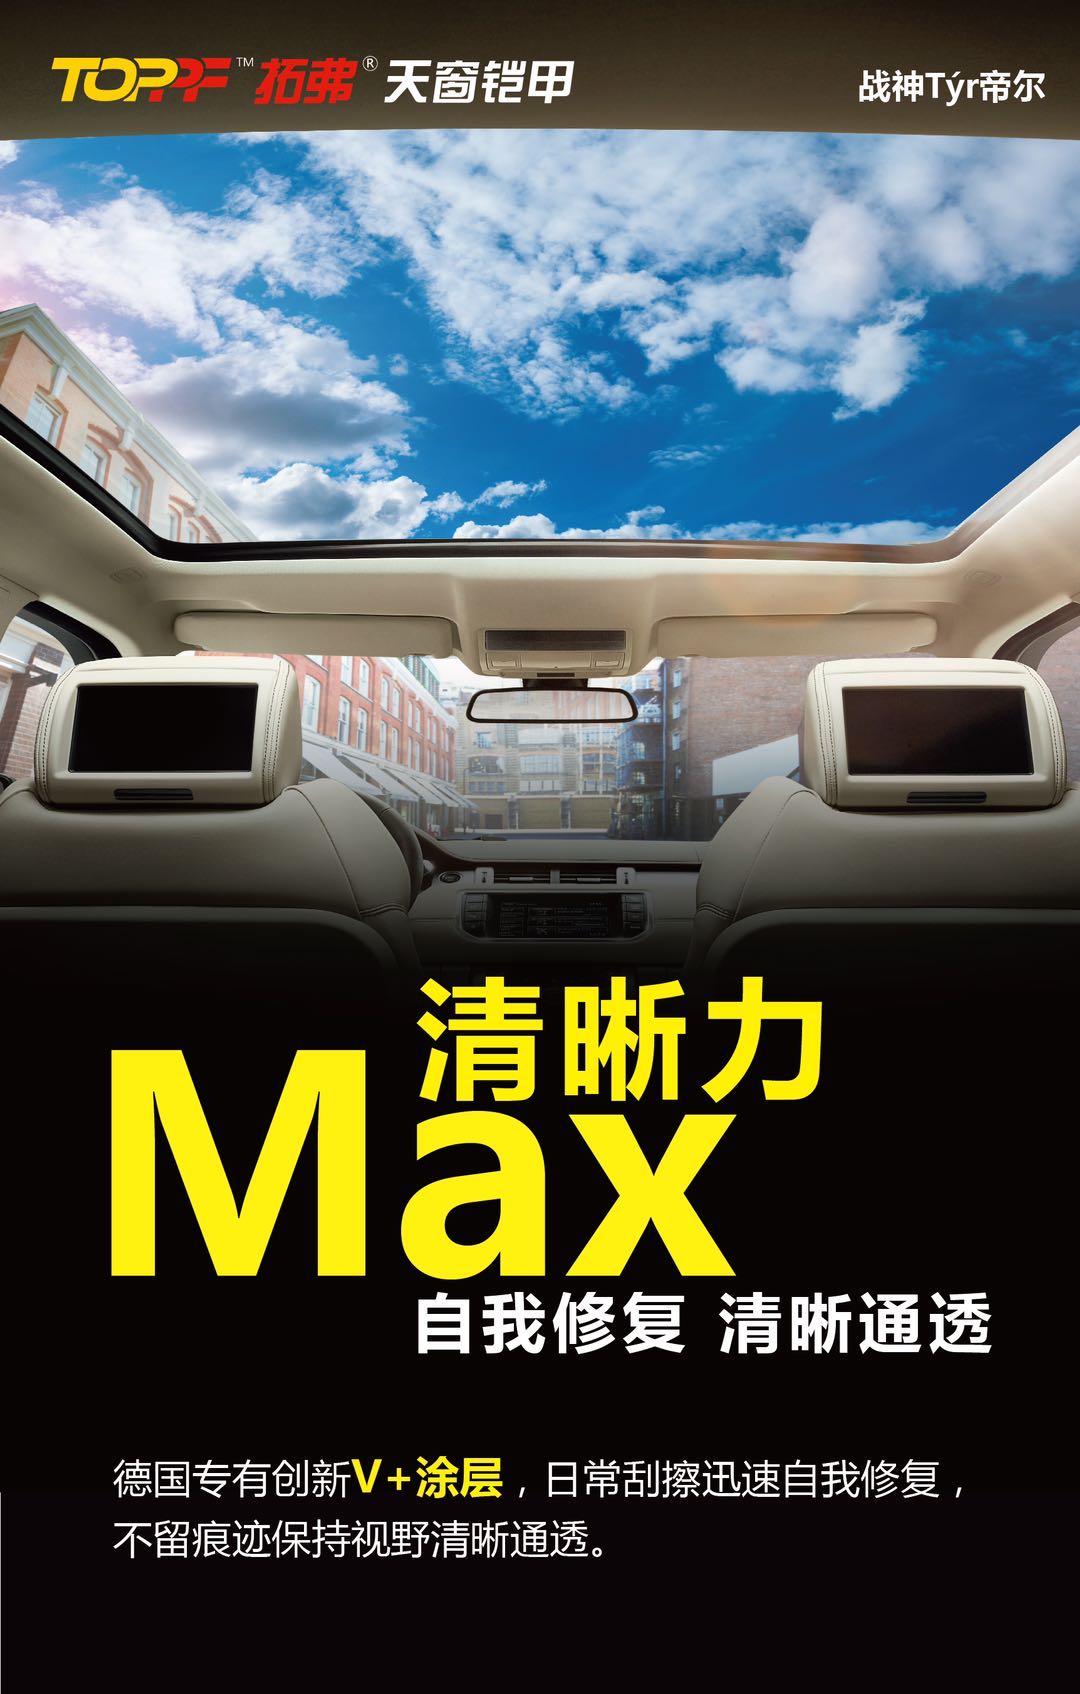 Sunroof Protection Film   TYR Series   